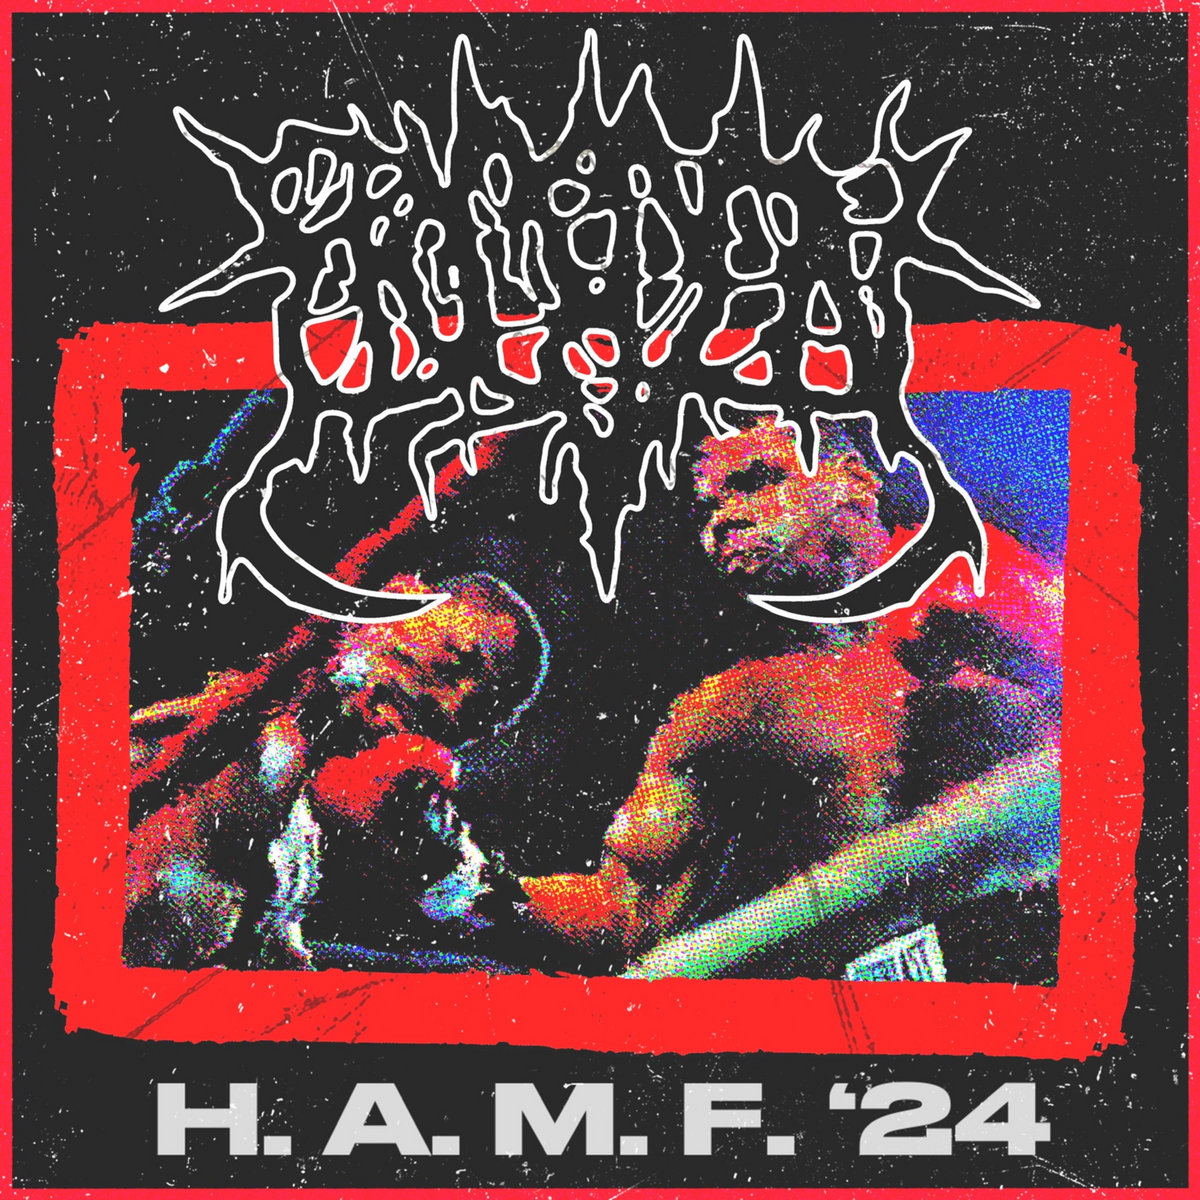 Pissed On - H.A.M.F. '24 cover art